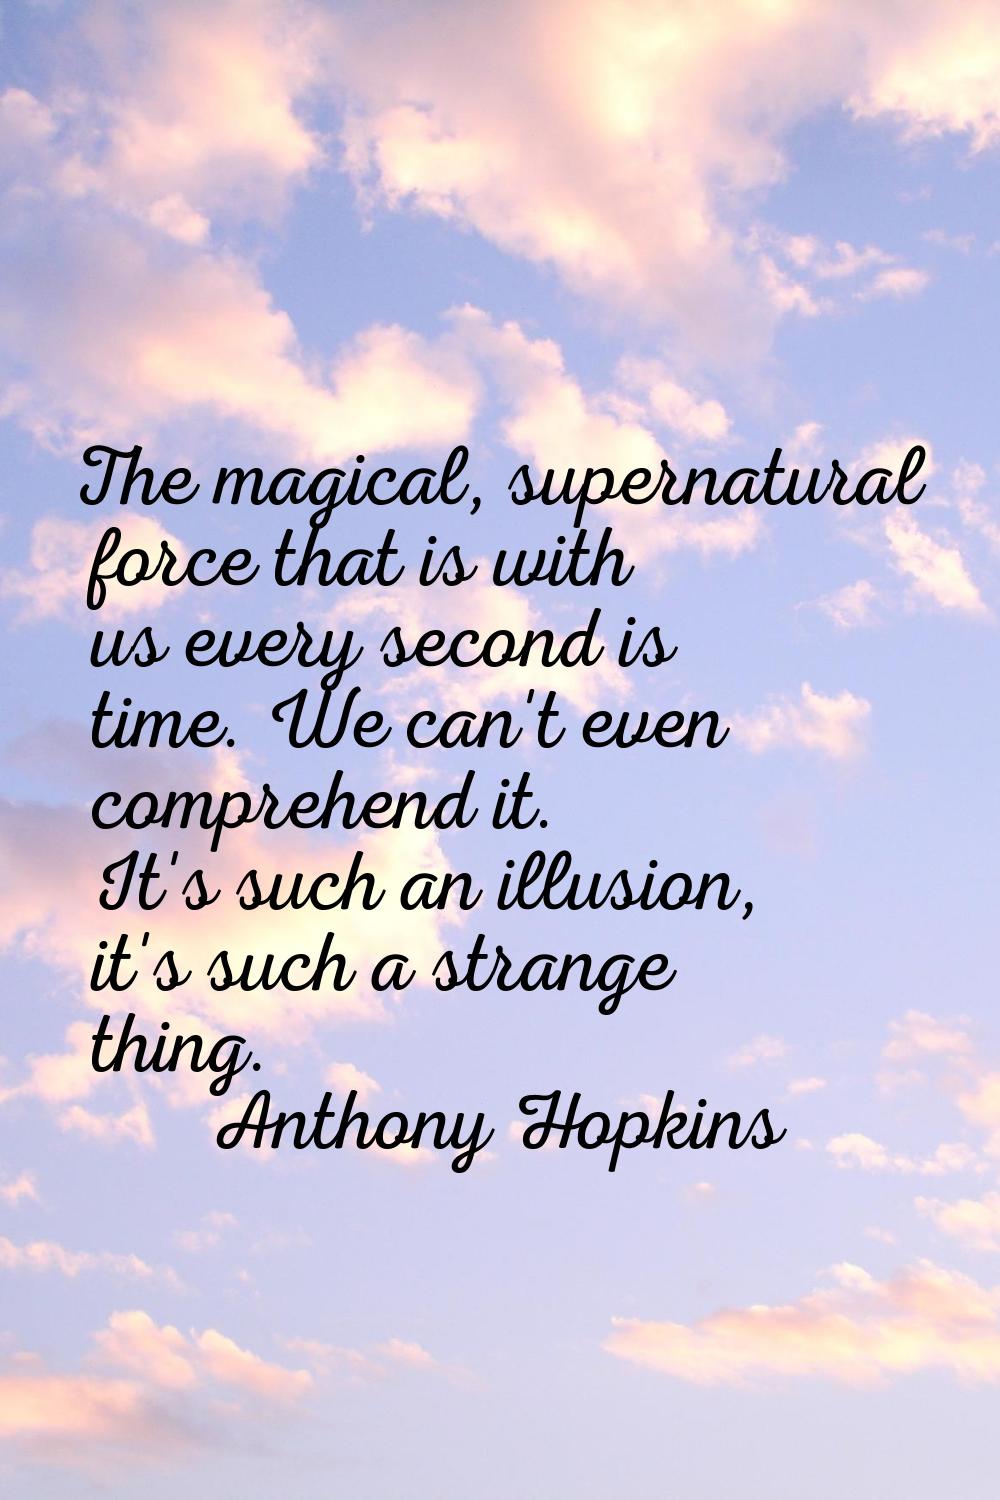 The magical, supernatural force that is with us every second is time. We can't even comprehend it. 